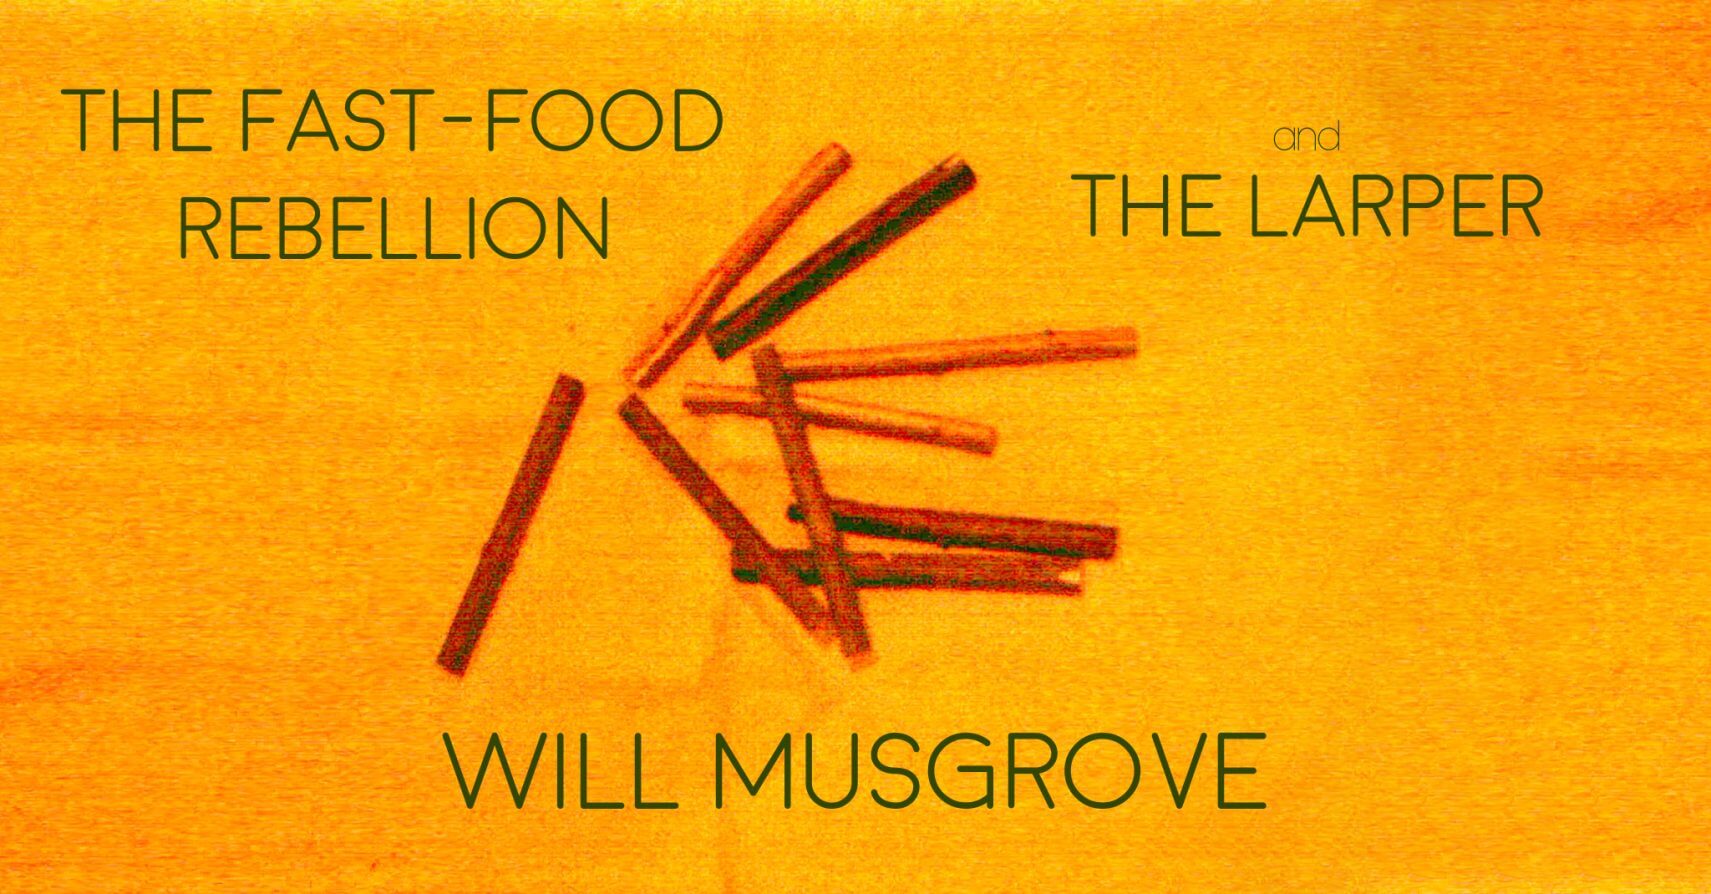 THE FAST-FOOD REBELLION and THE LARPER by Will Musgrove